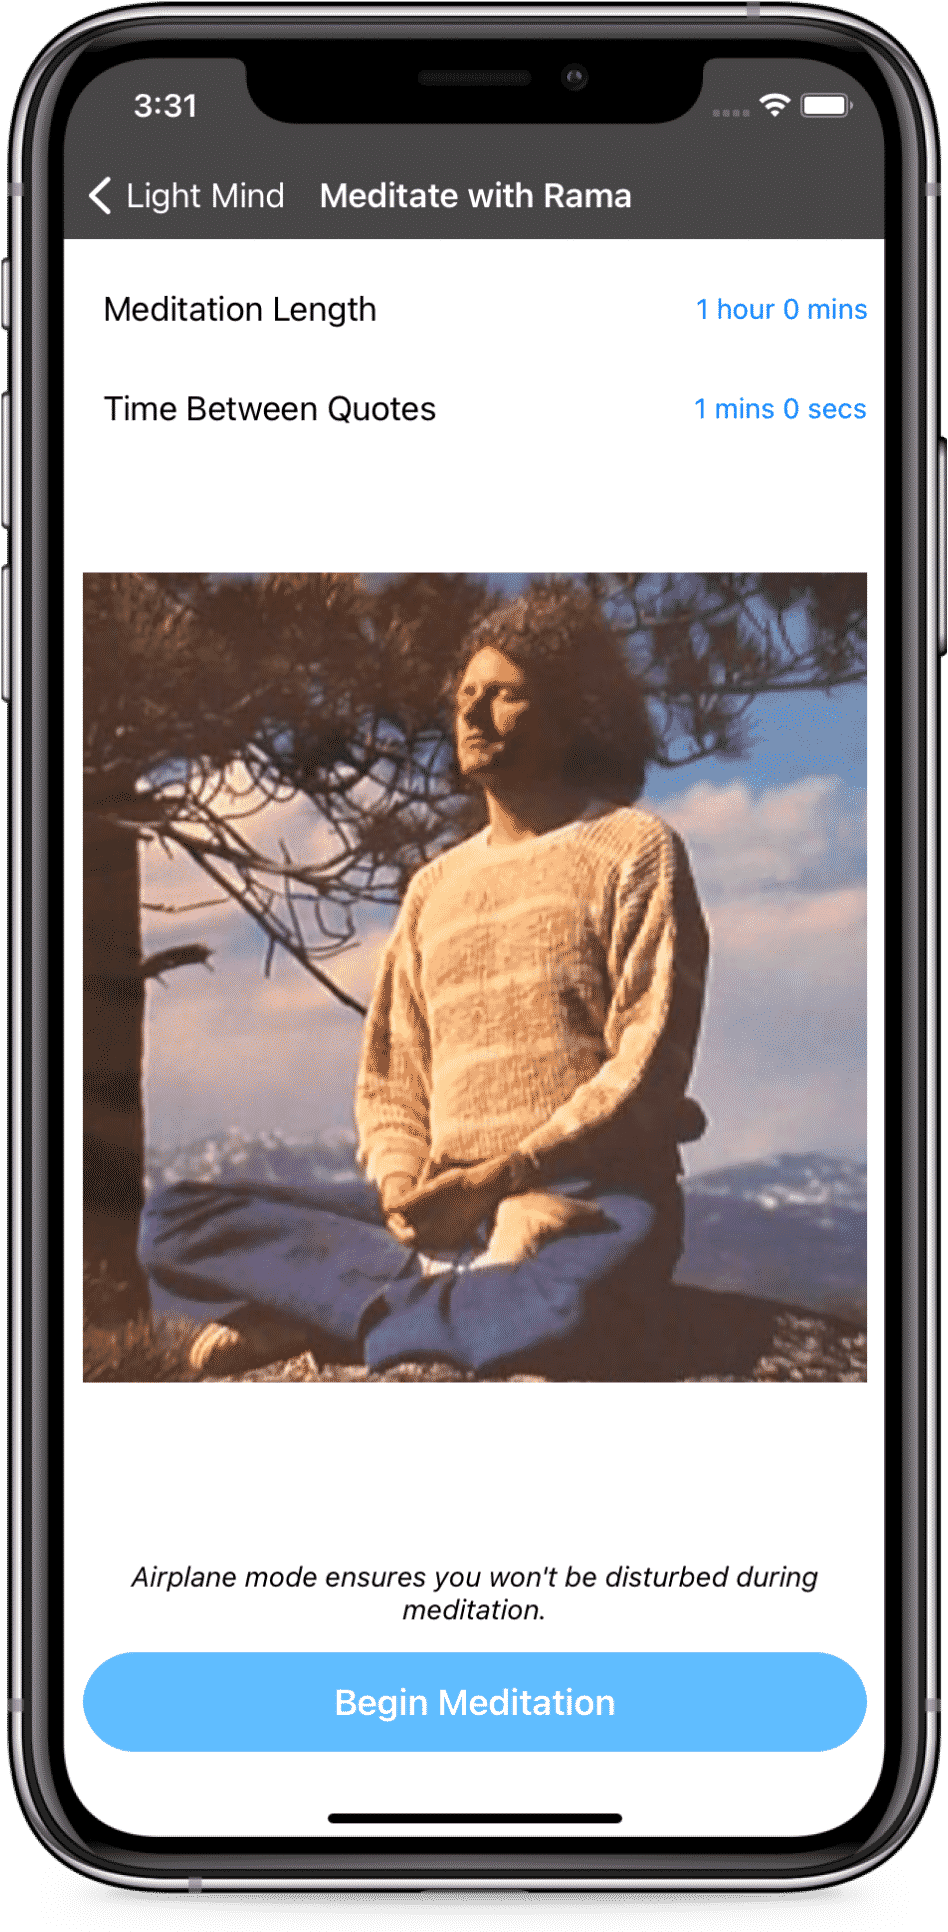 Light Mind app showing Meditate with Rama screen